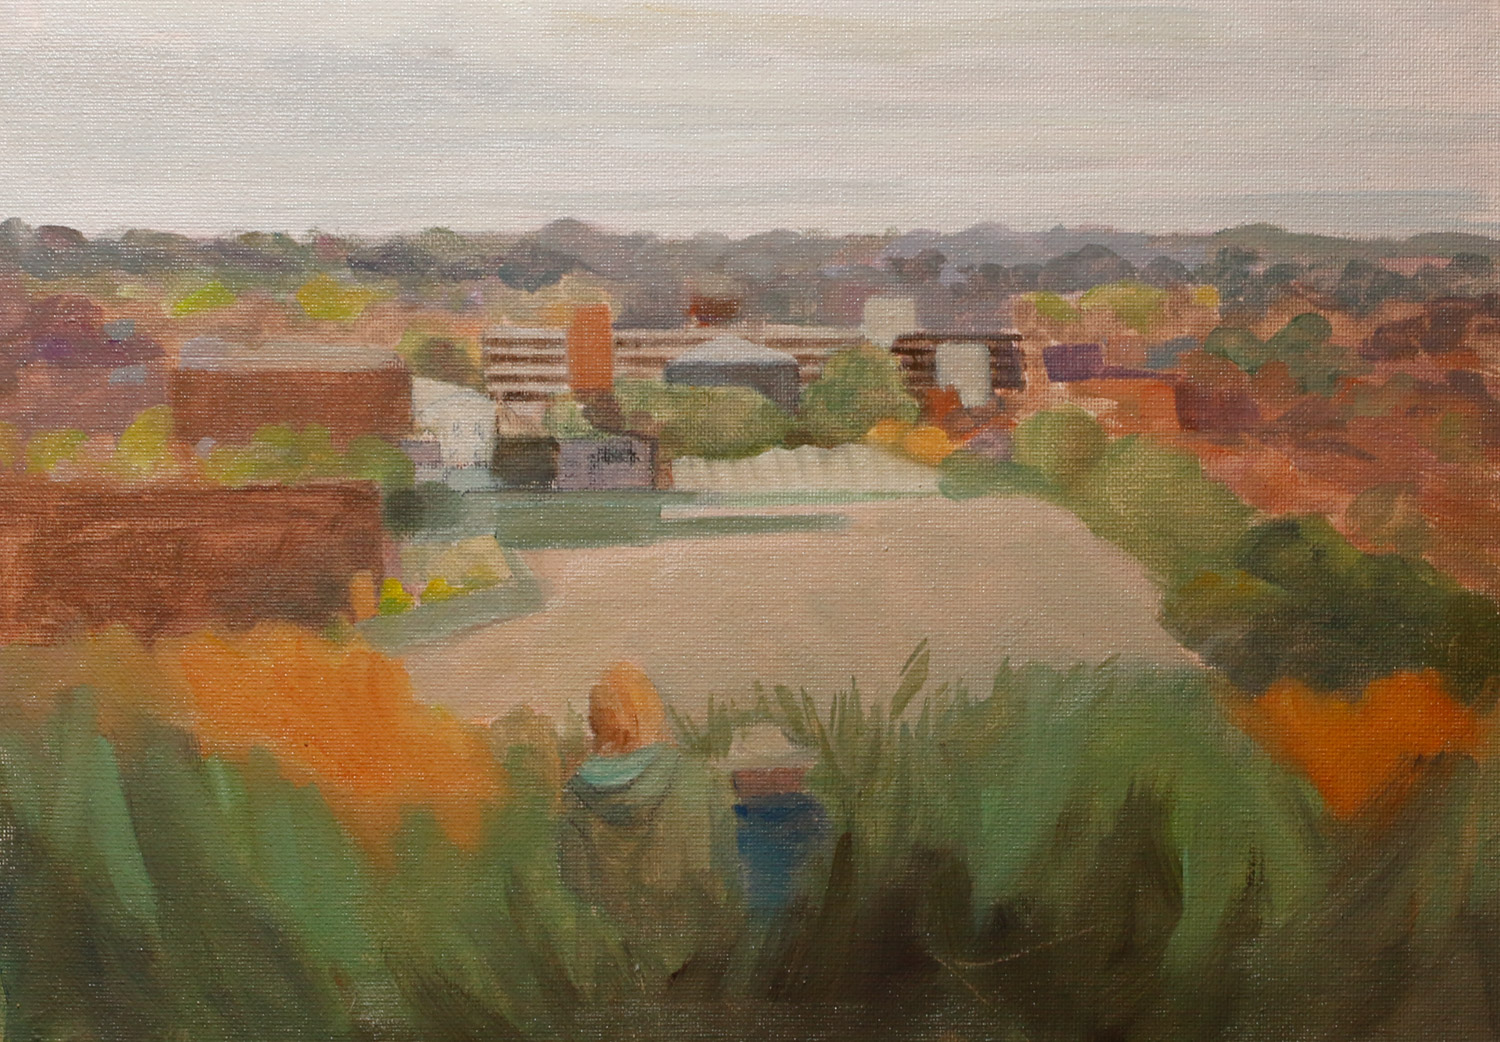 Artist Susannah Penrose - The City, £240 14x10 Oil on Board at Paint Out Norwich 2015